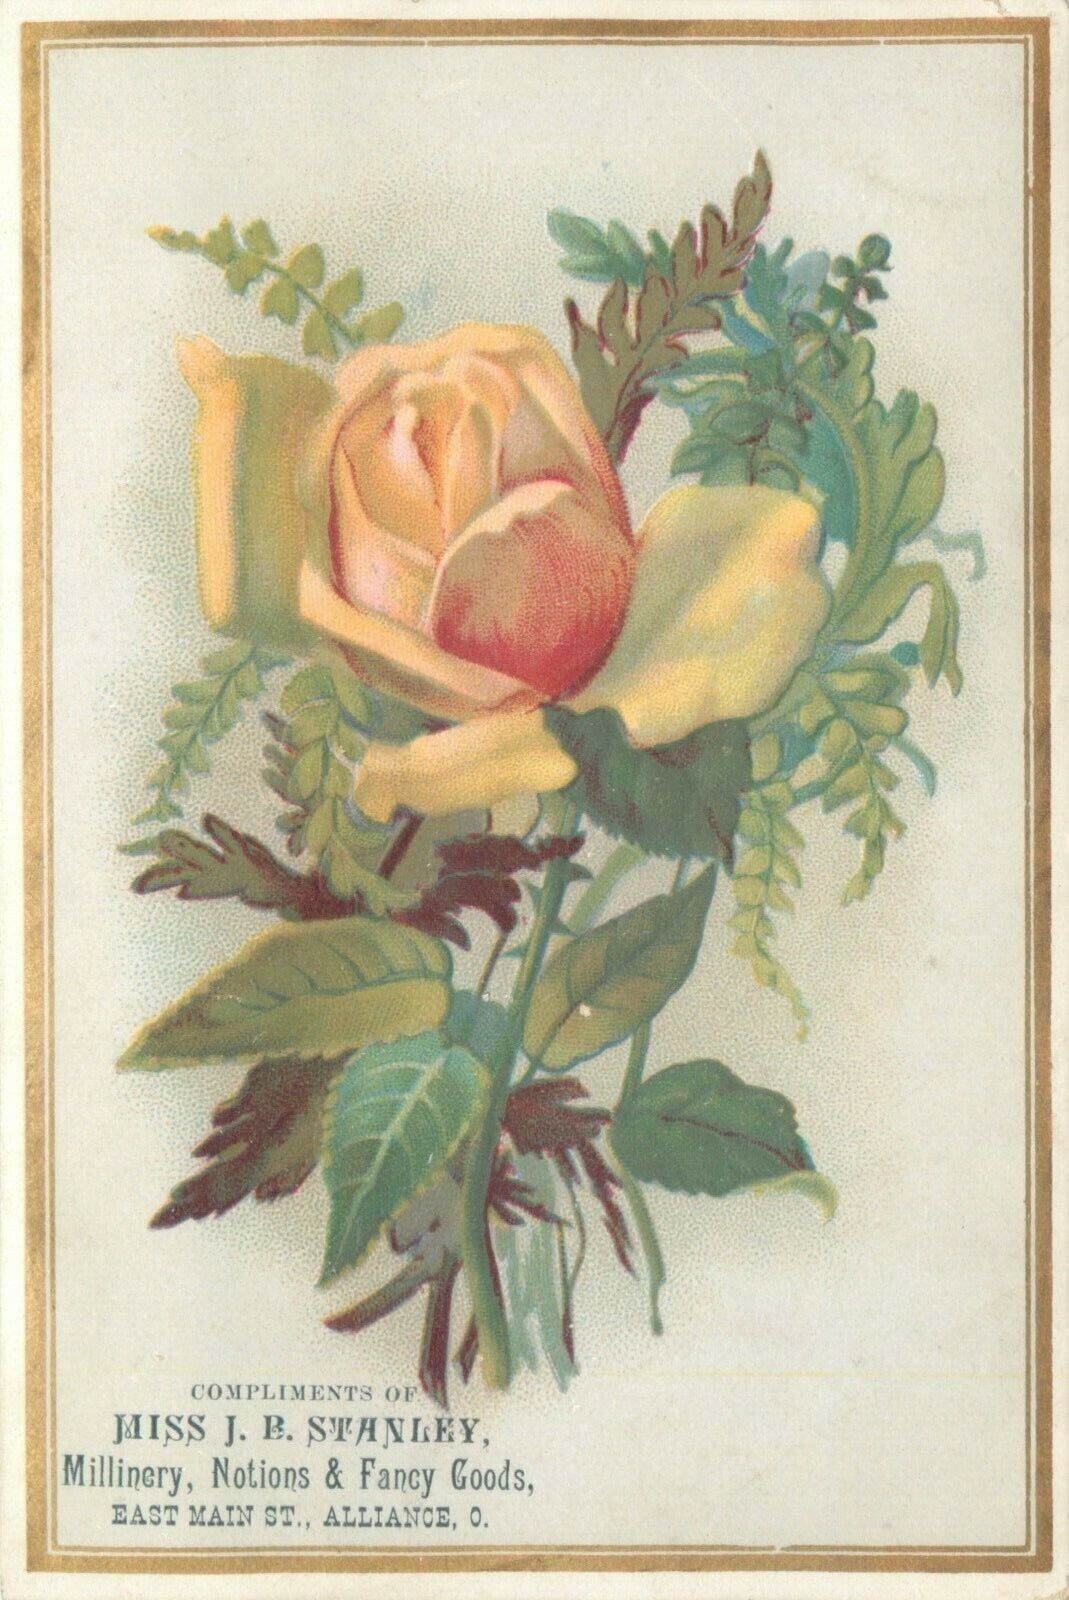 Tradecard, Miss J.B. Stanley, Millinery, Notions & Fancy Goods, Alliance OH 1887